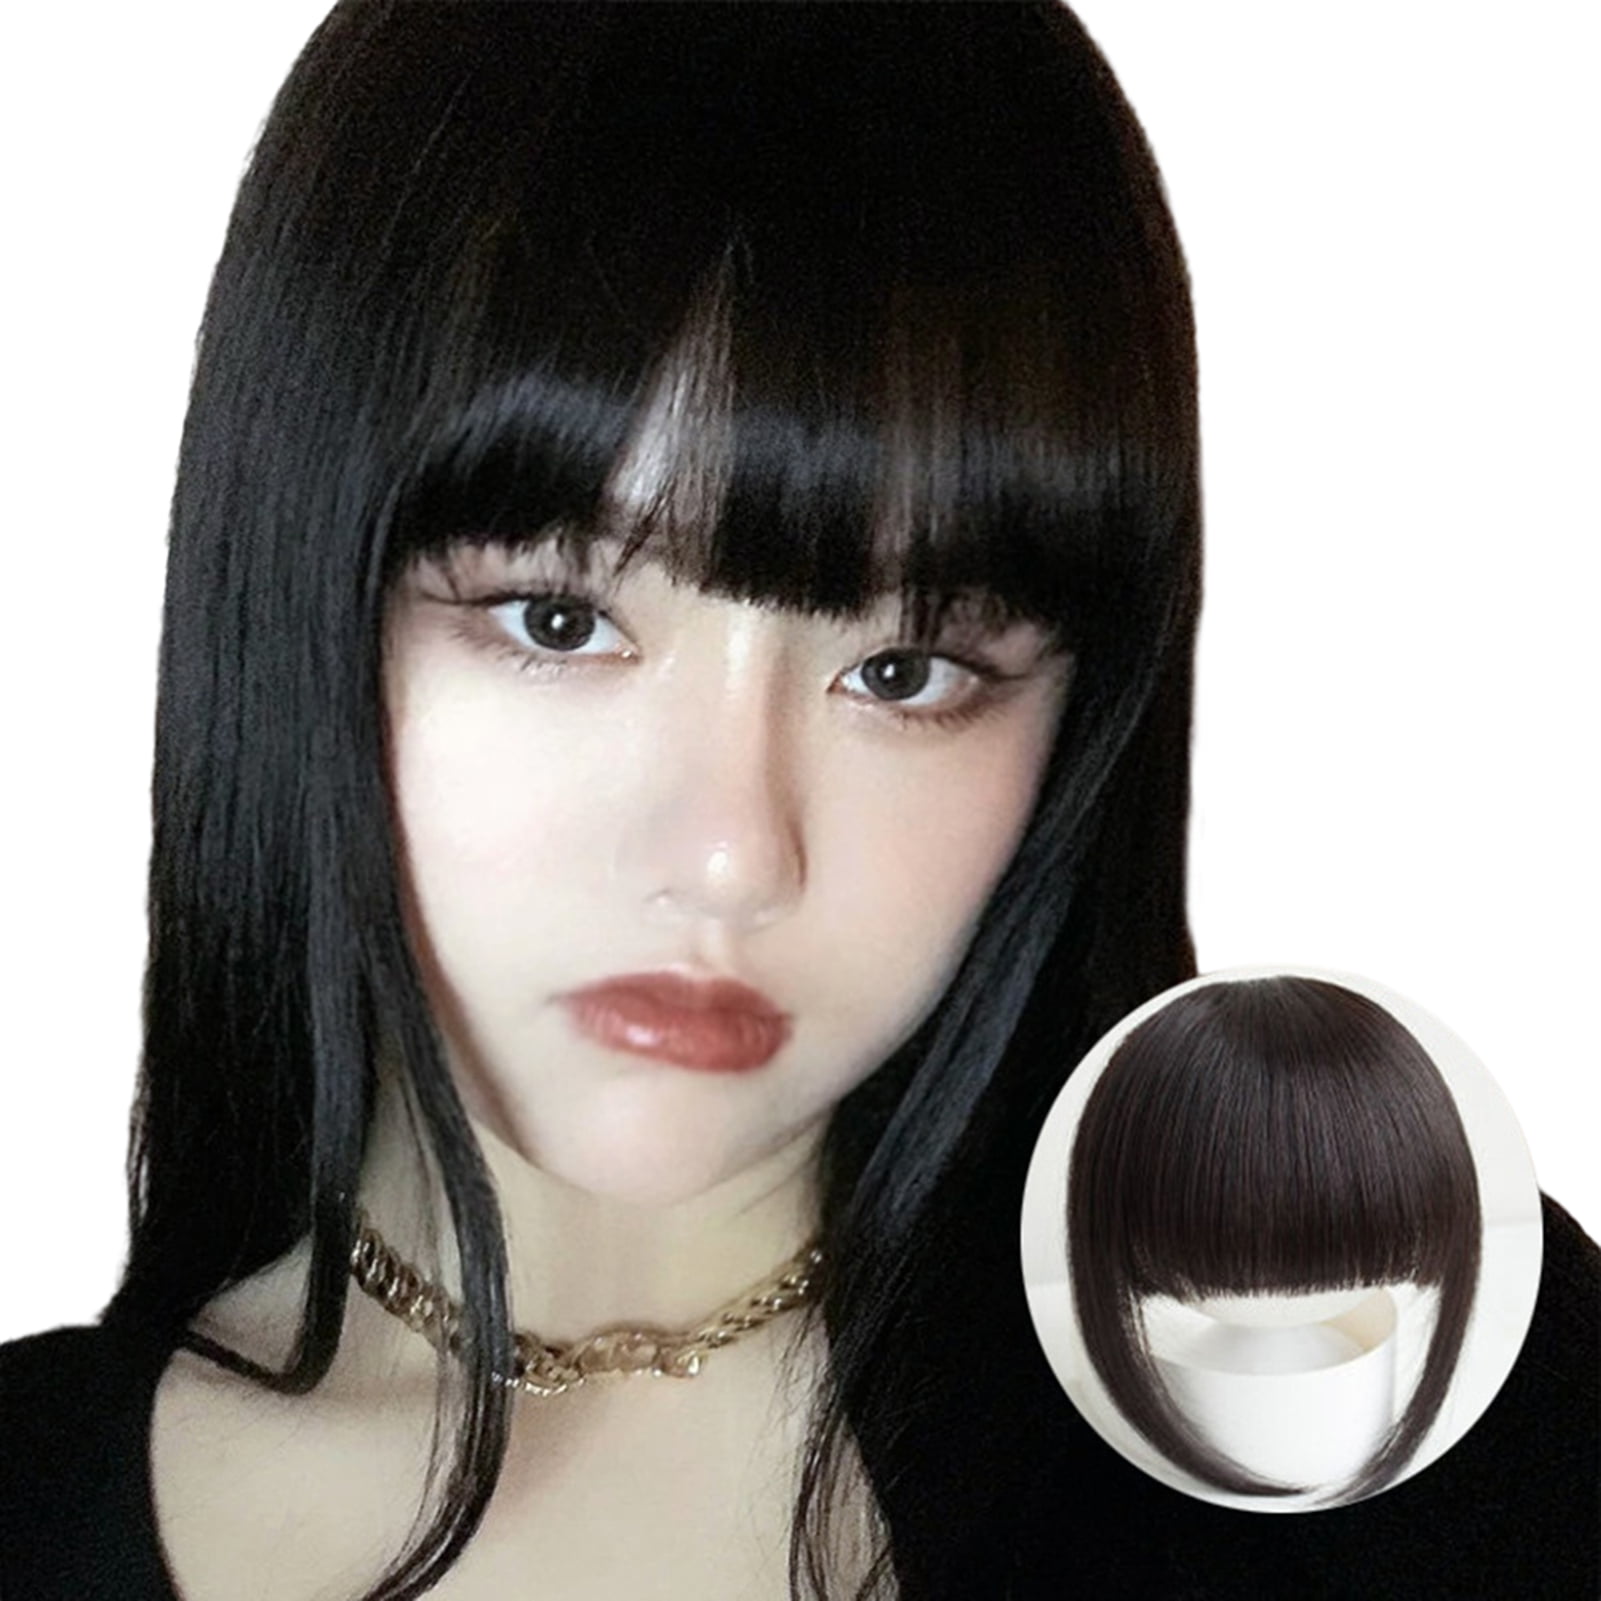 Duretiony Clip-In Fringes Hair Extension Straight Bangs Hairpiece for